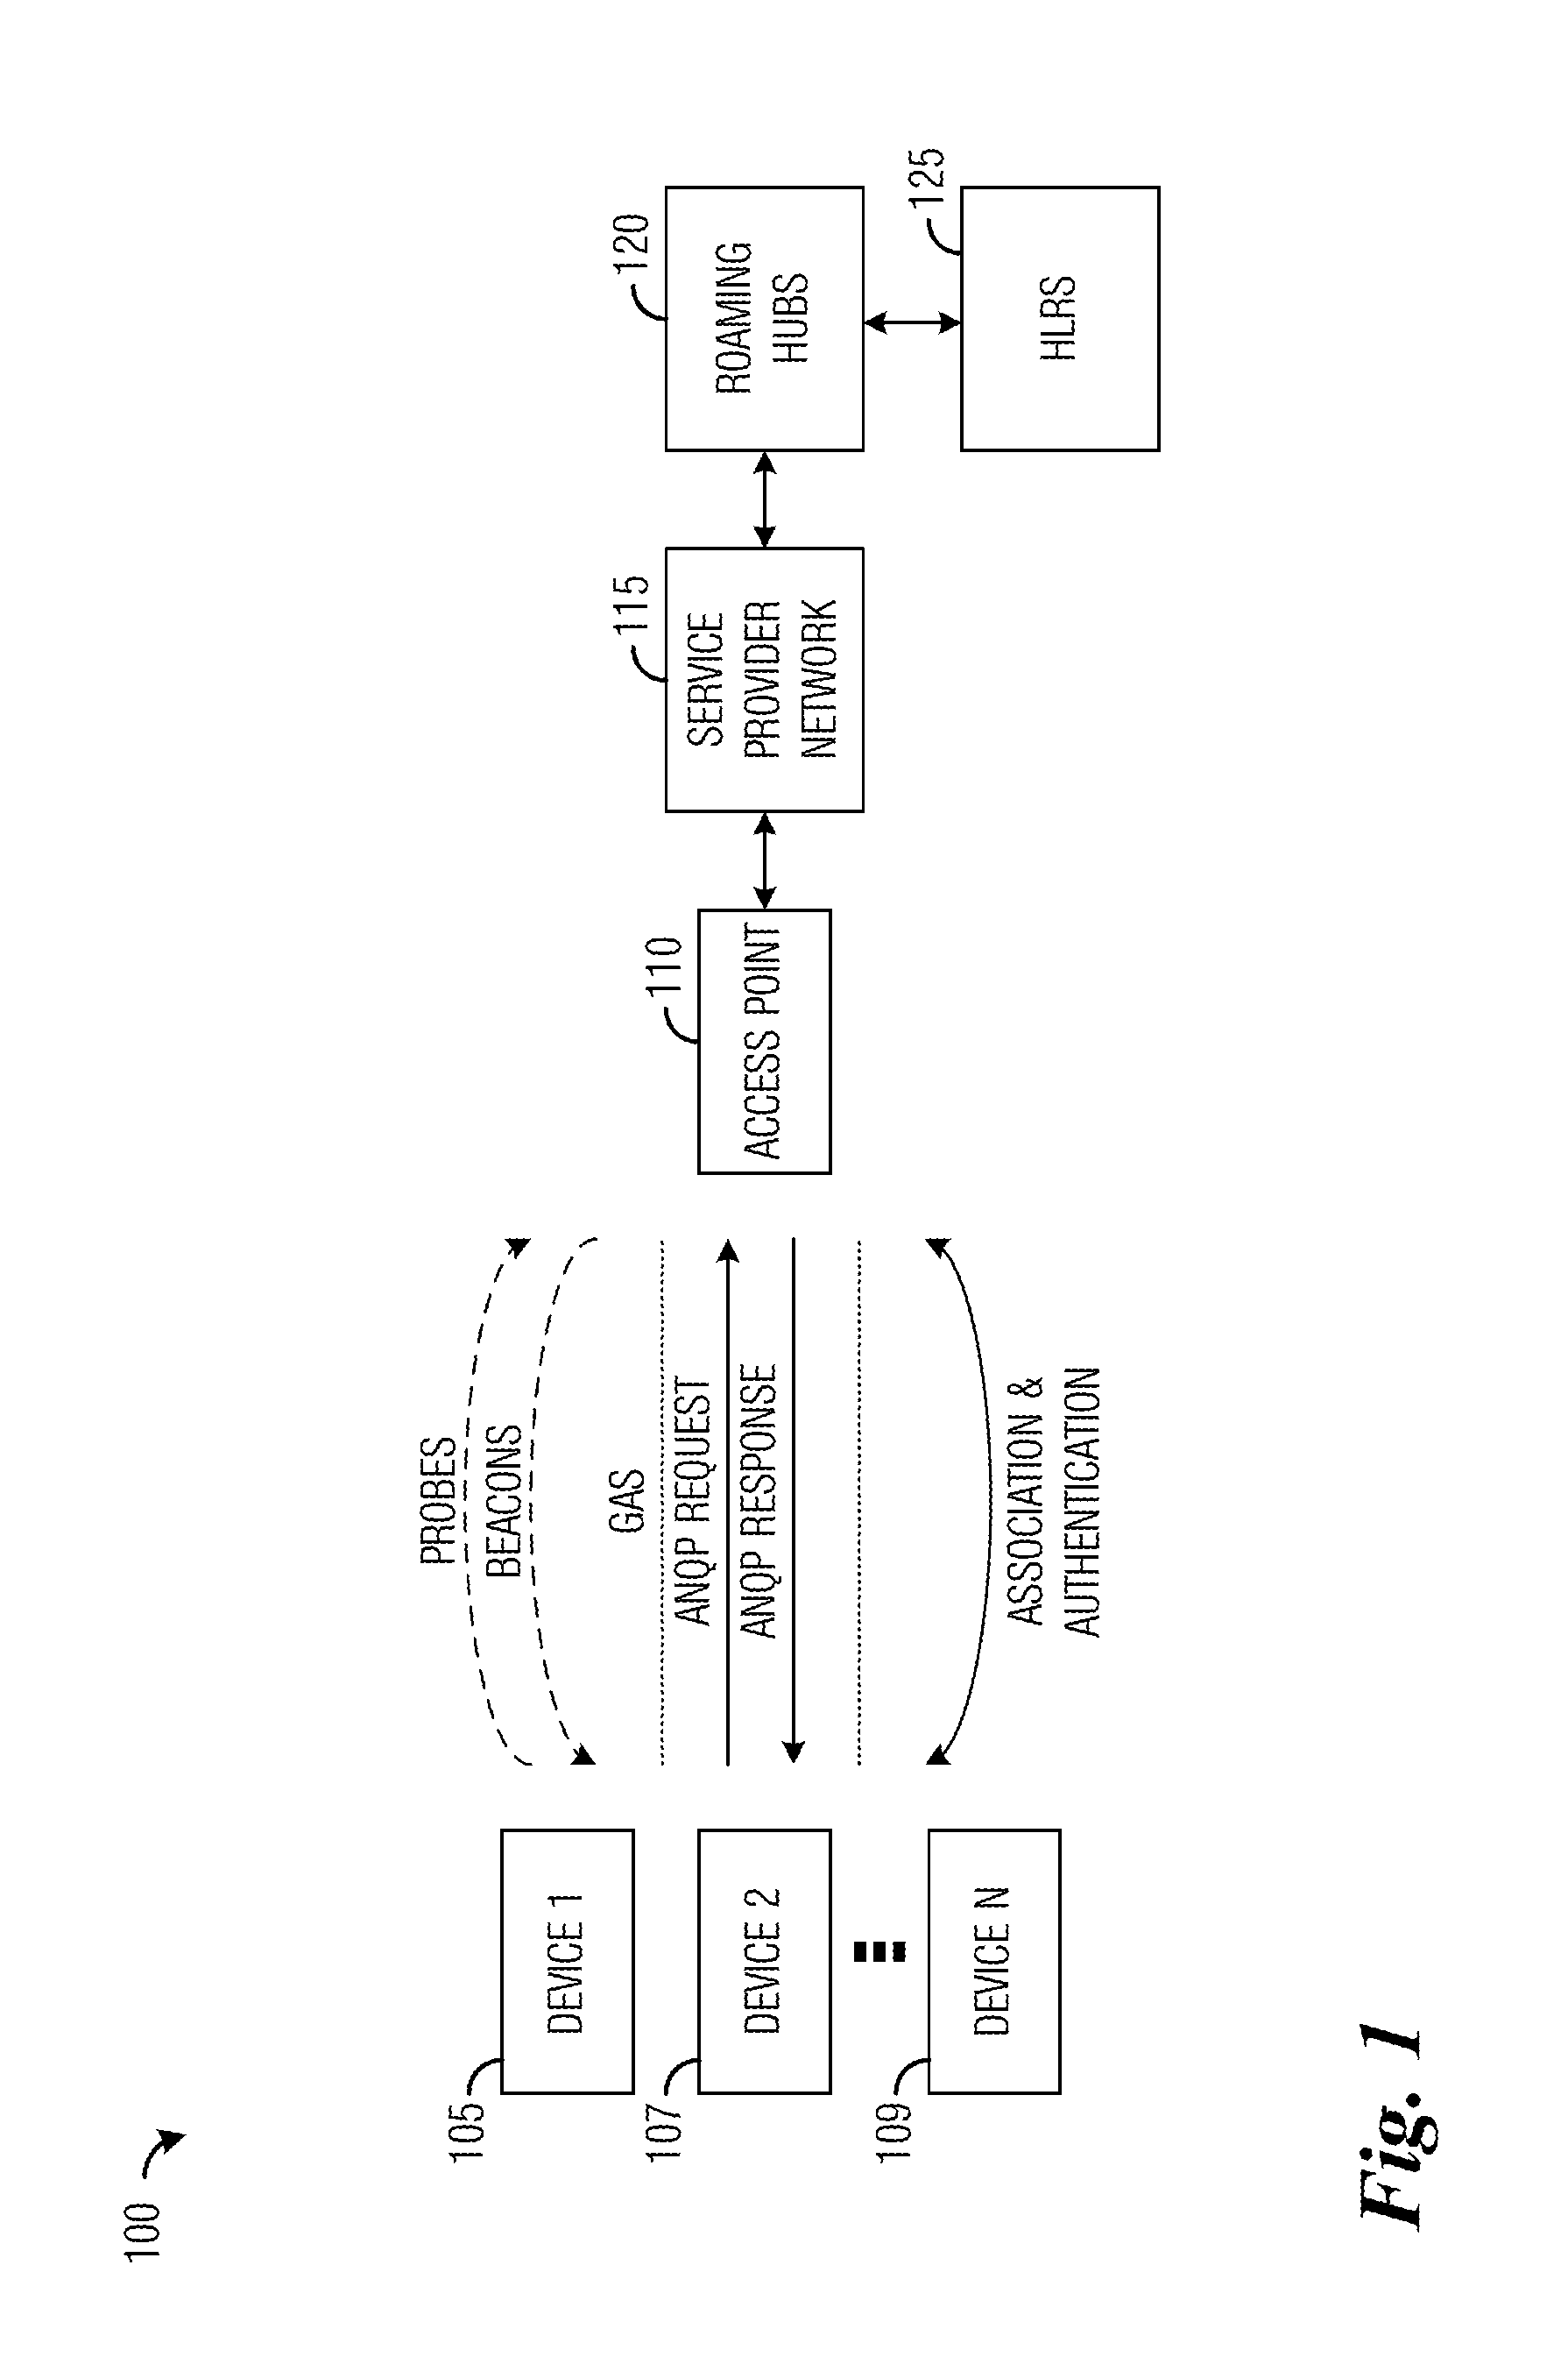 System and Method for Efficient Communications System Scanning